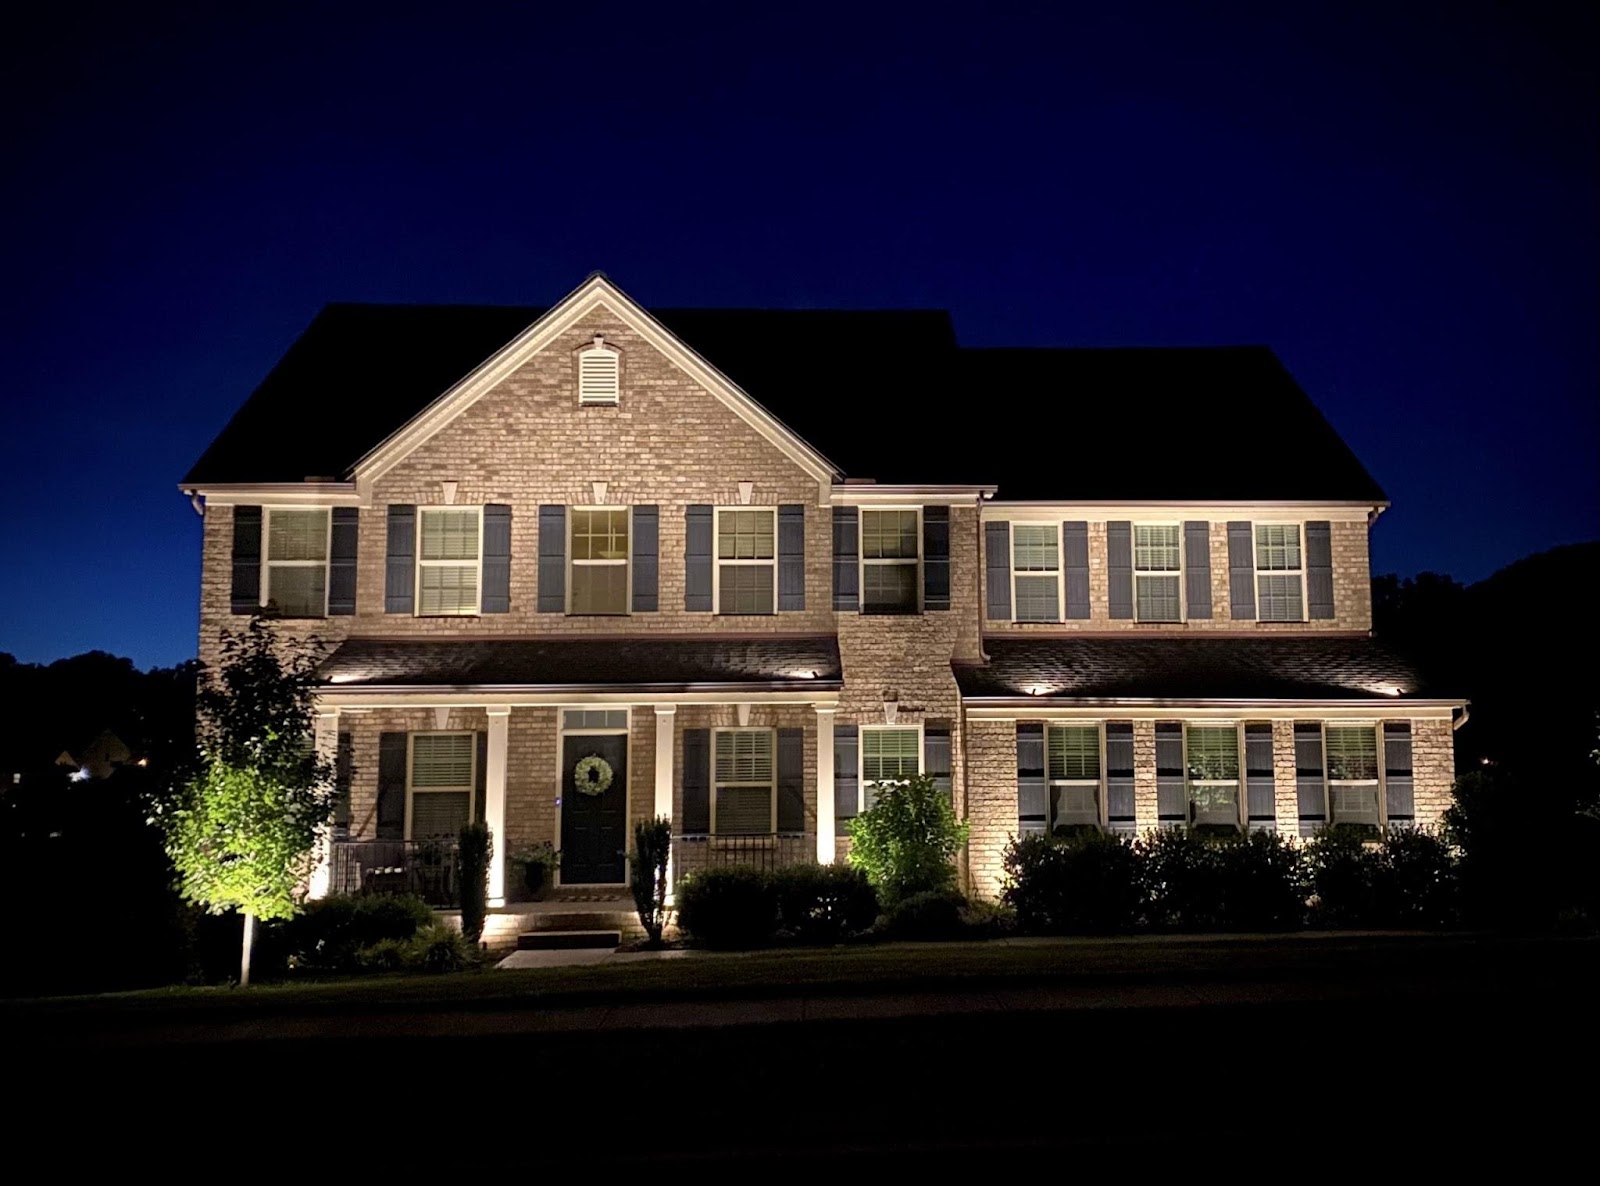 Light TN is a family-owned company offering architectural and landscape lighting in Nashville.